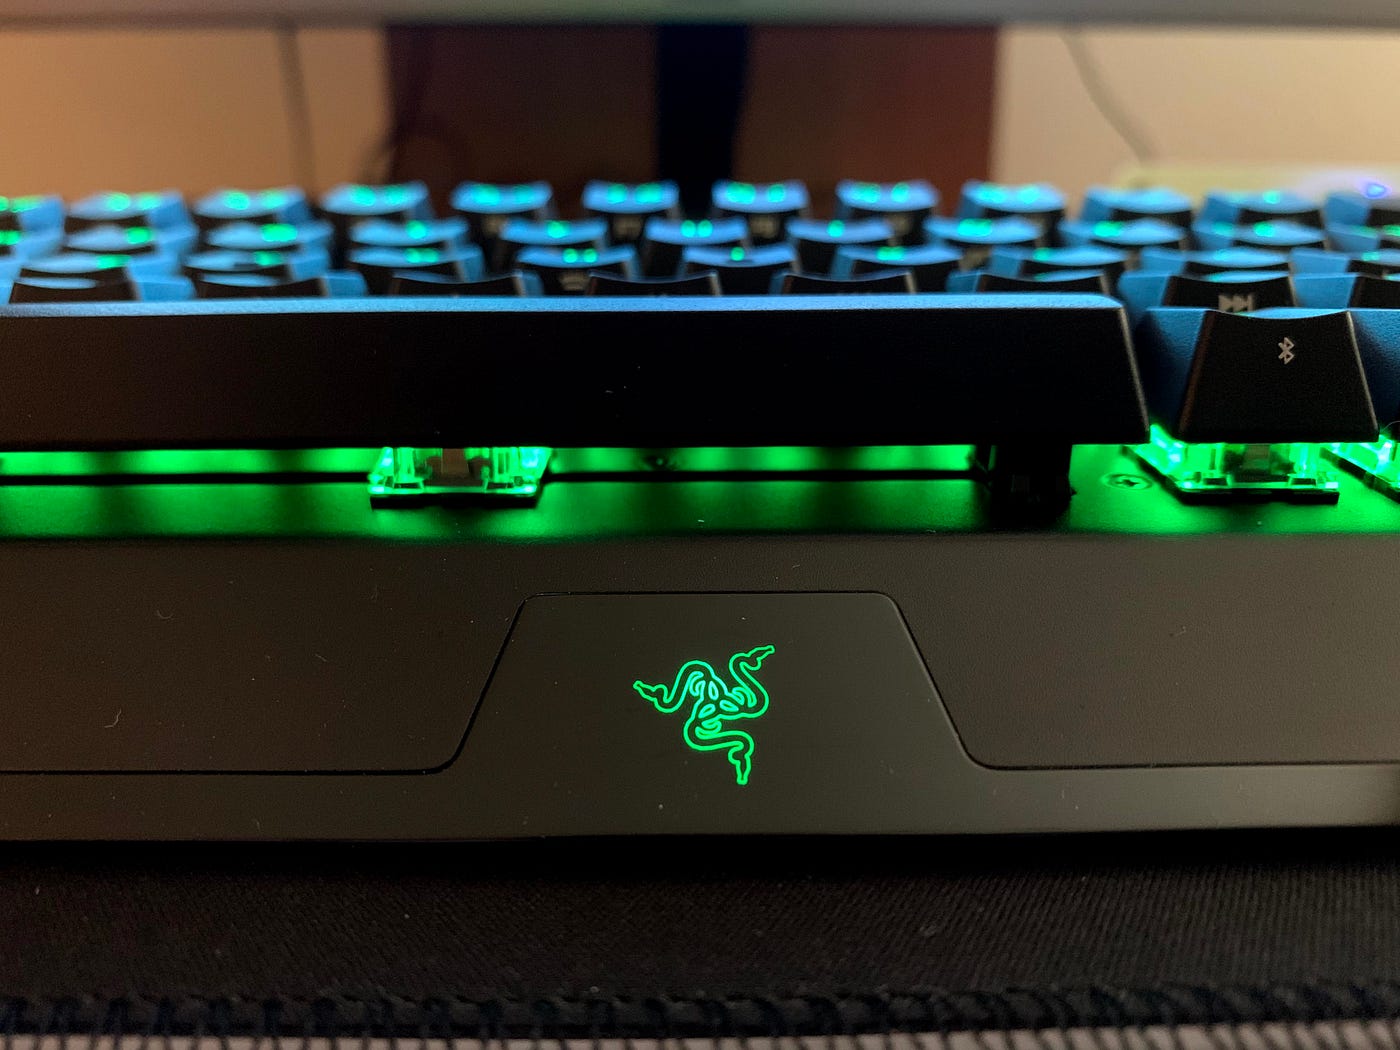 Razer BlackWidow V3 Mini HyperSpeed review: The fantastic little keyboard  that could